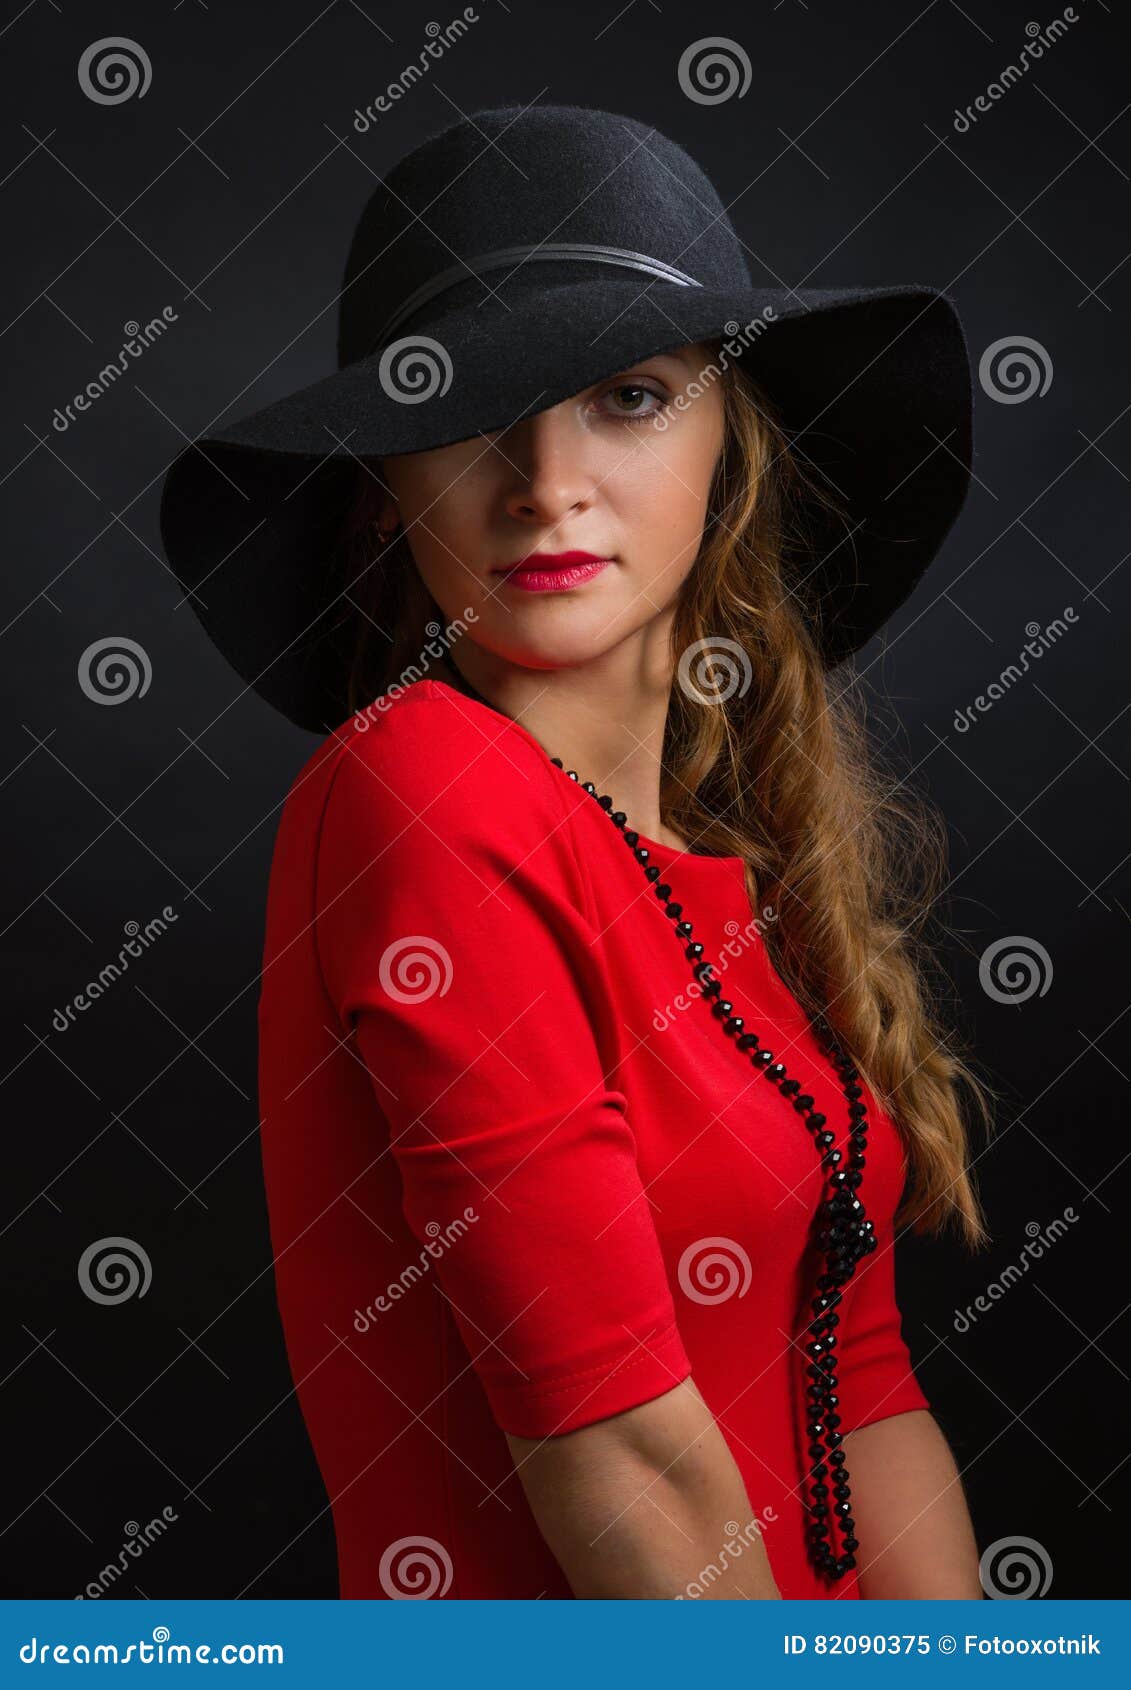 The Beautiful Young Girl in a Bright Red Dress and Black Hat with the ...